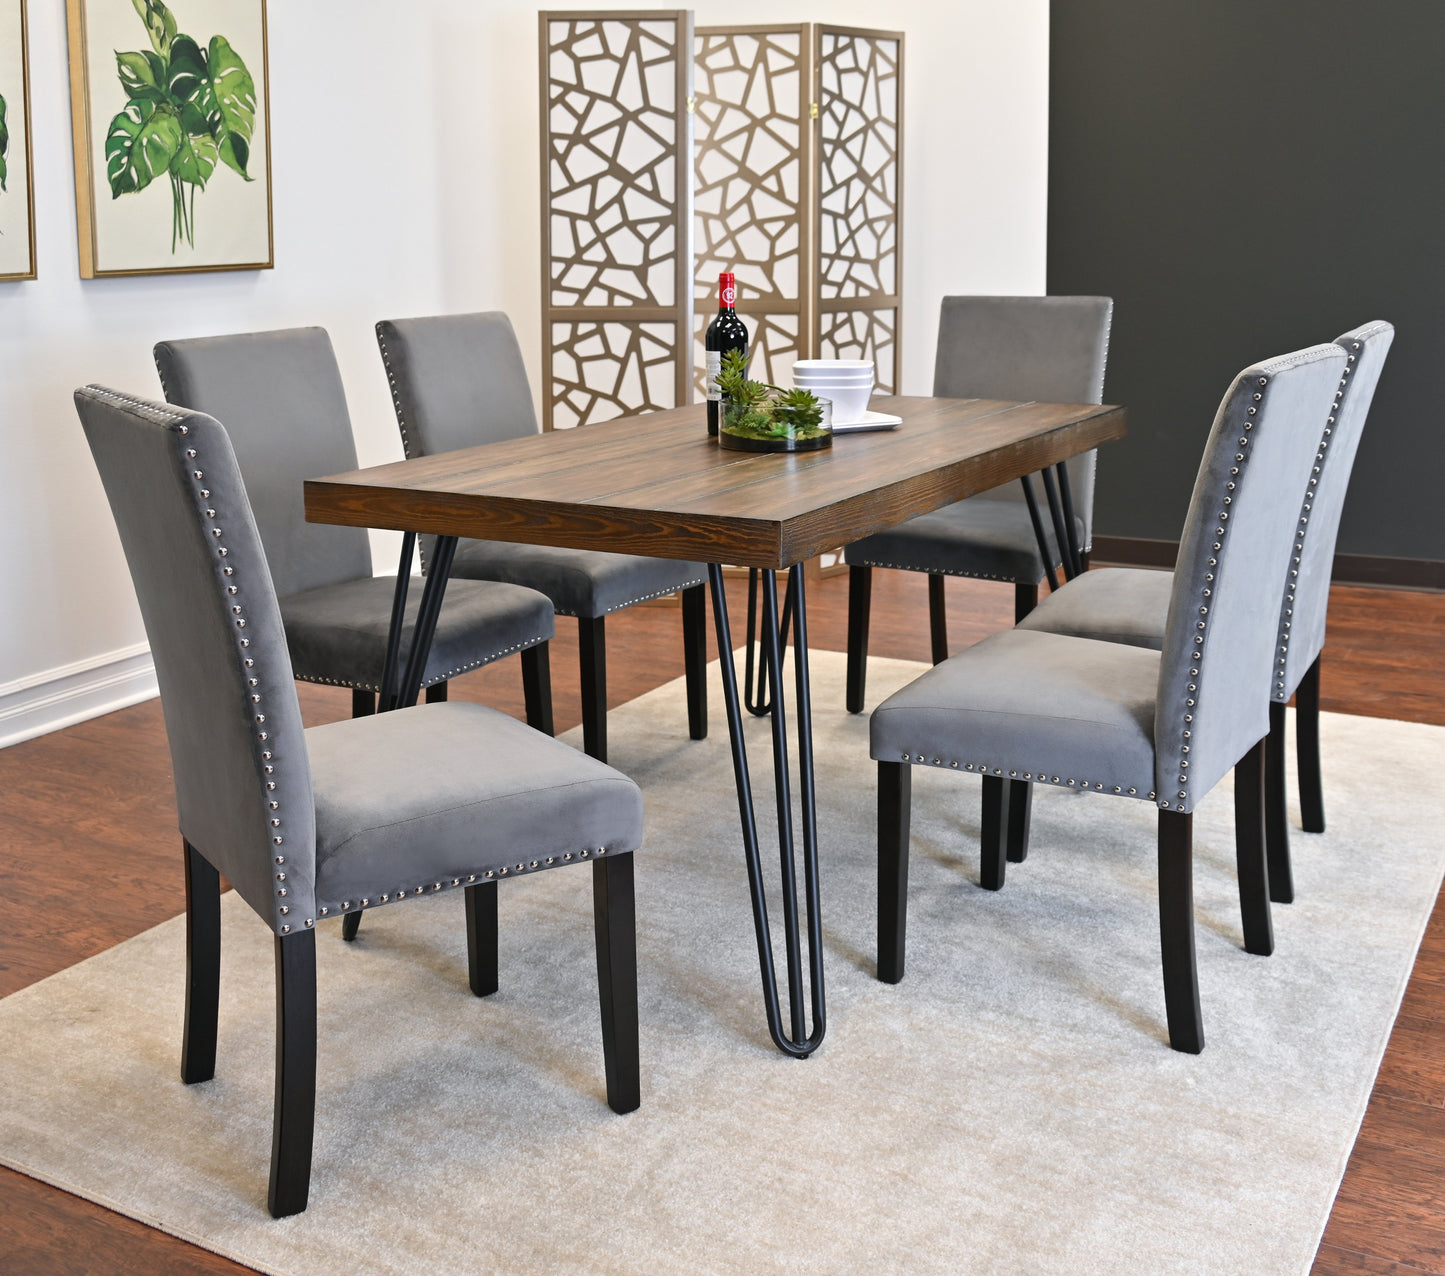 Ashzo 7-Piece Dining Set, Hairpin Dining Table with 6 Chairs, 3 Color Options